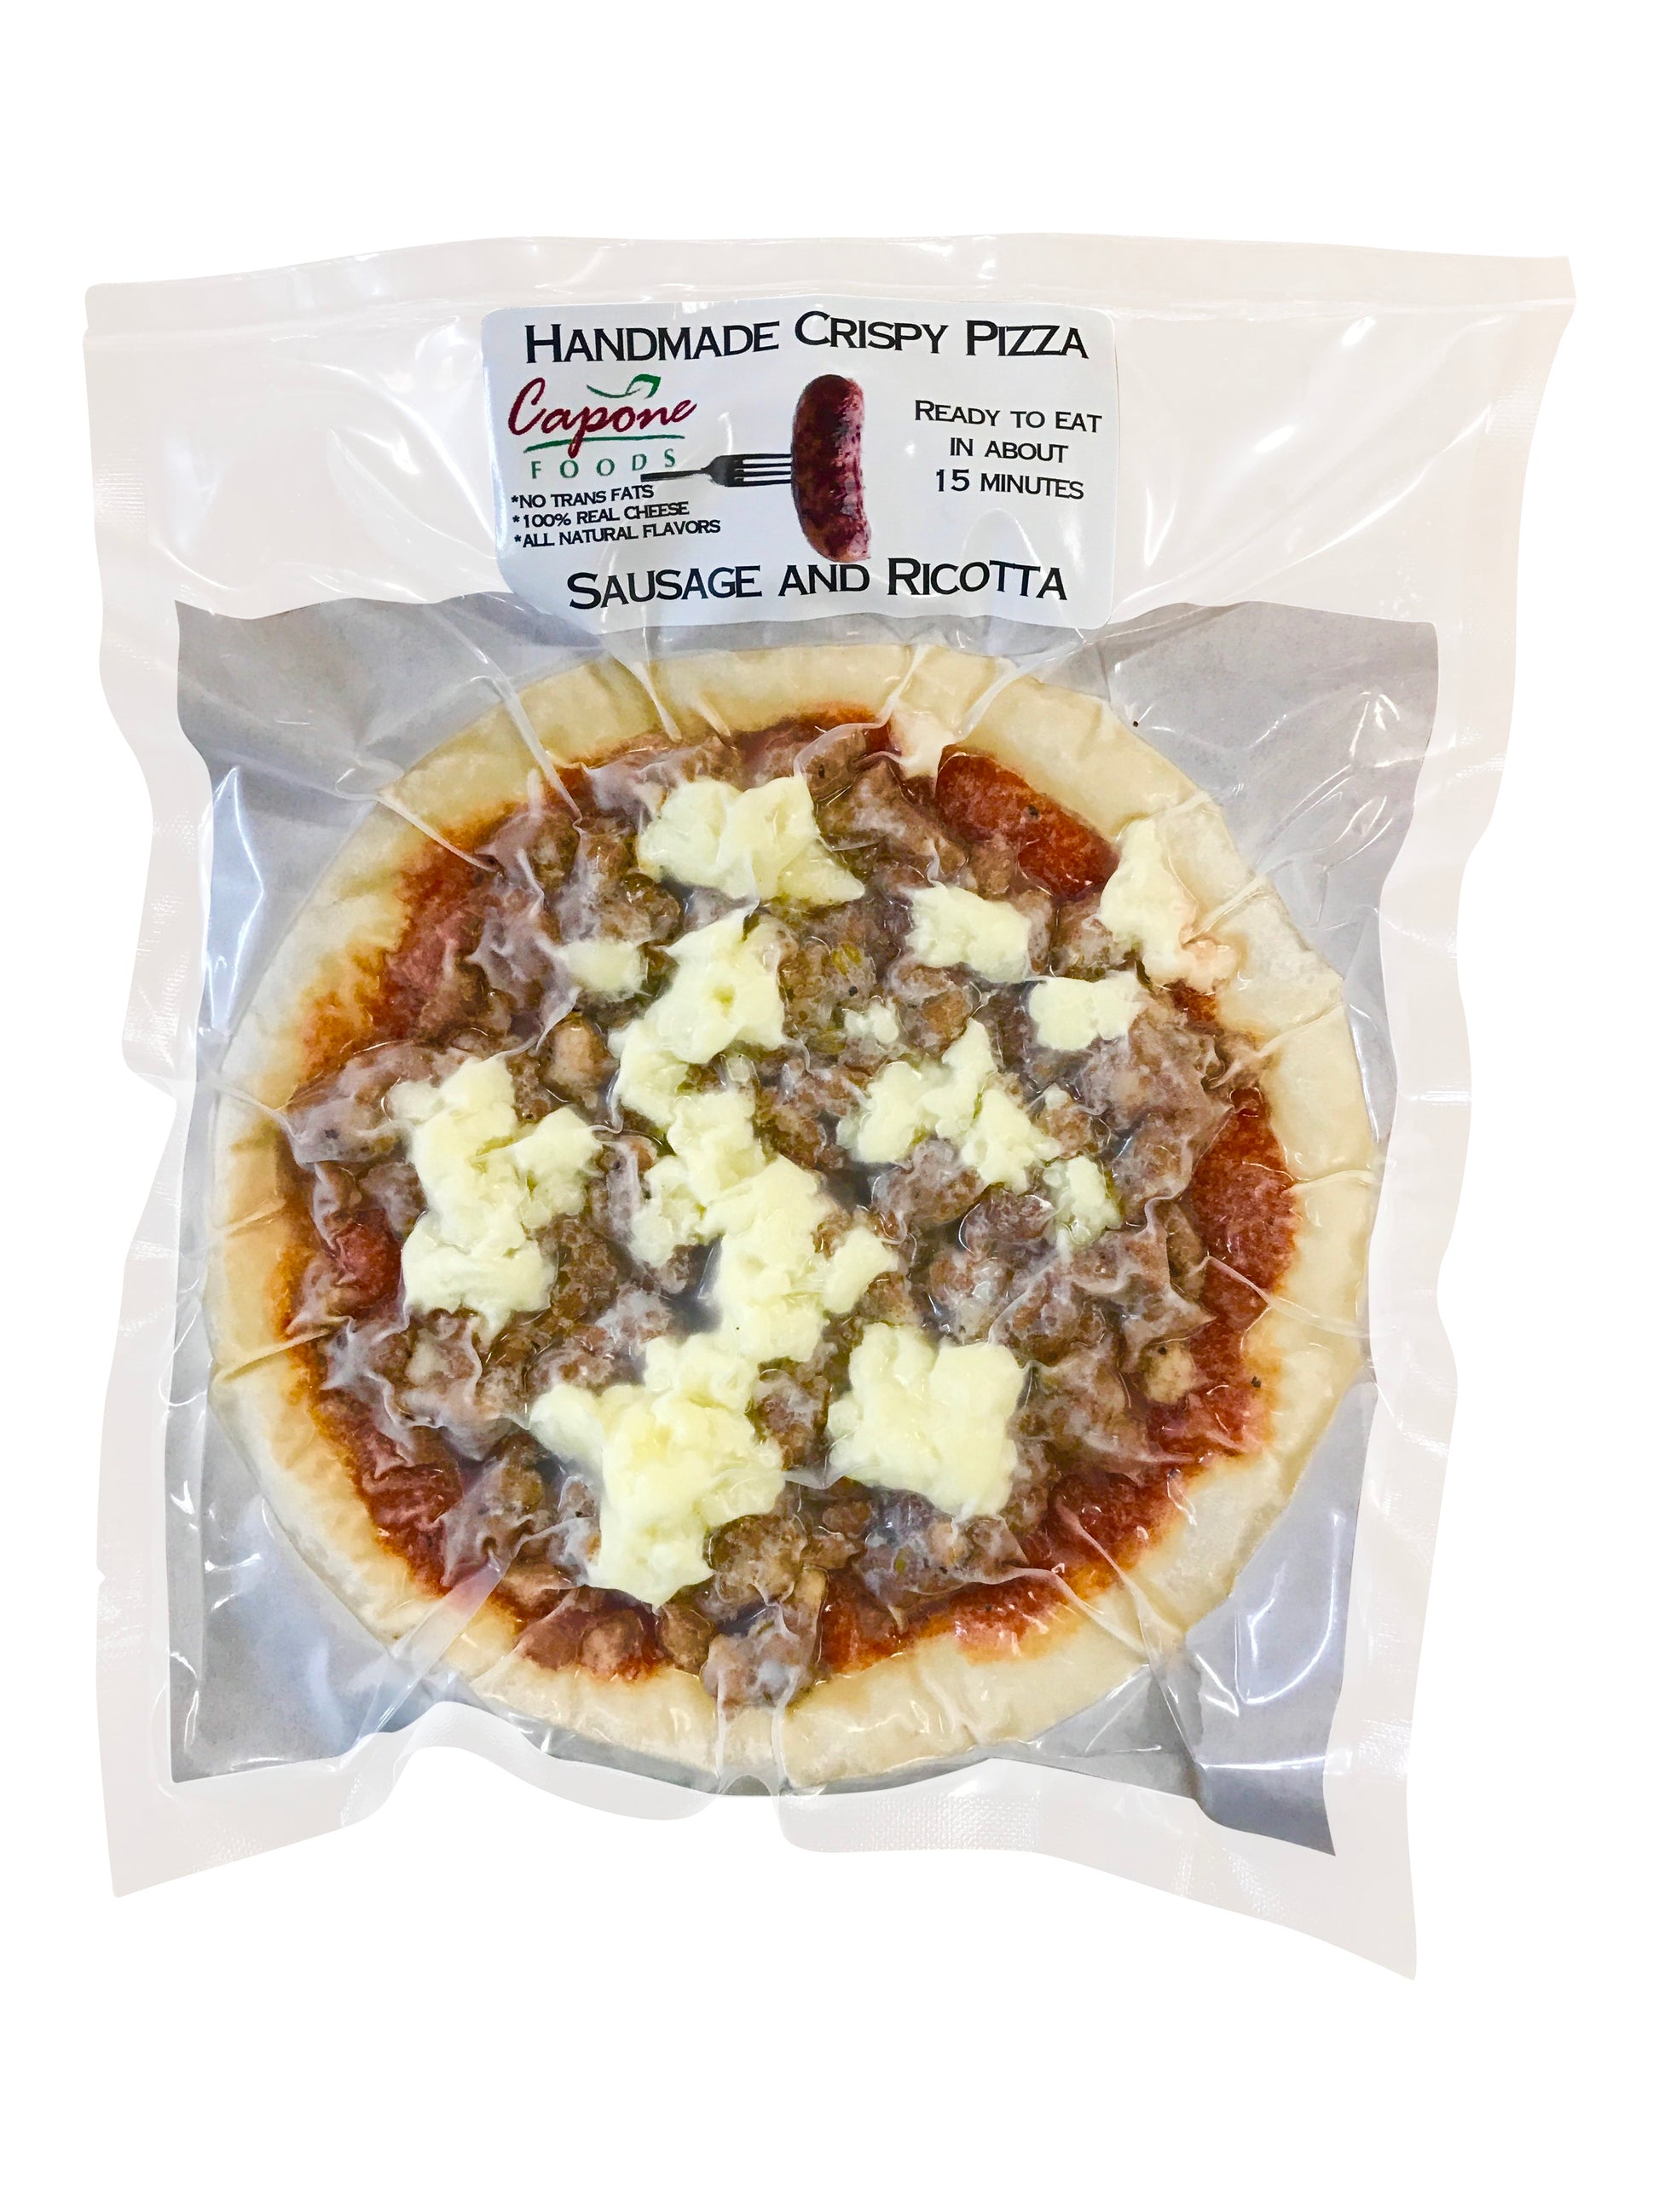 Fresh Sausage and Ricotta pizza in package